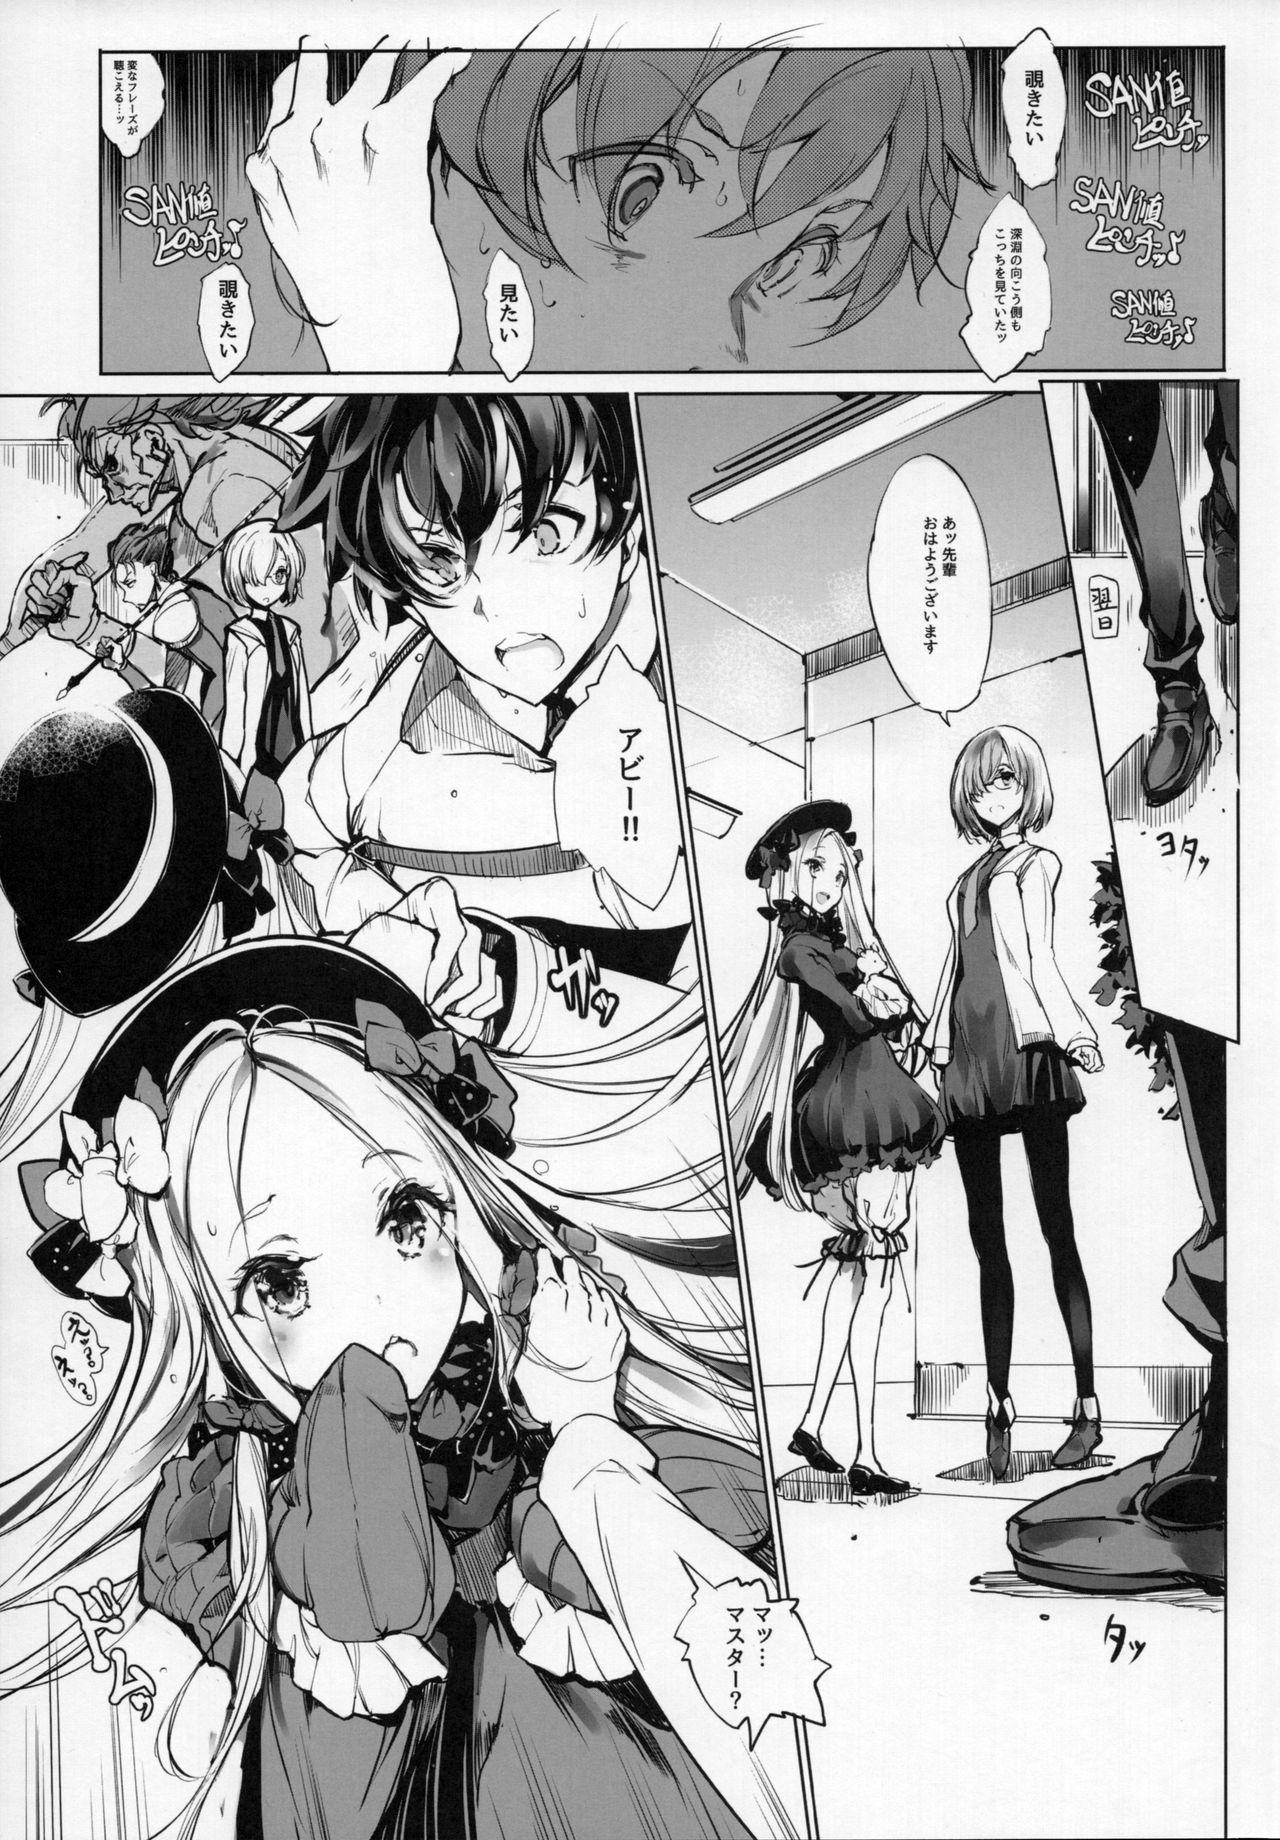 Mom Sen no Ko o Haramu Mori no Shoujo - The girl of the woods with a thousand young - Fate grand order Cousin - Page 6